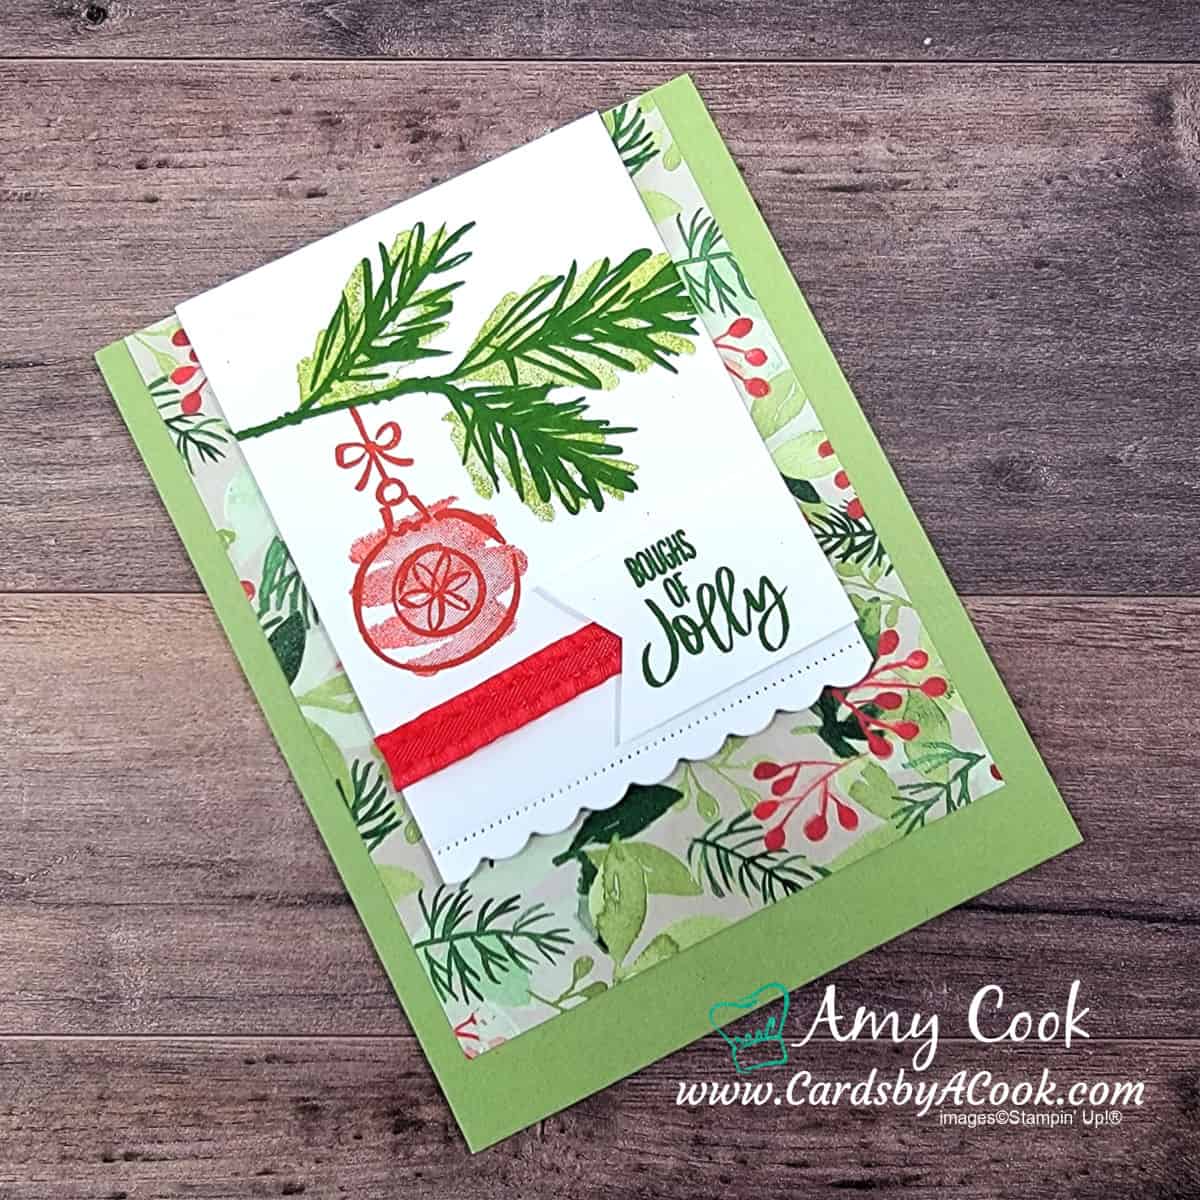 Christmas card featuring a Christmas tree branch hung with a red. Greeting reads Boughs of Jolly